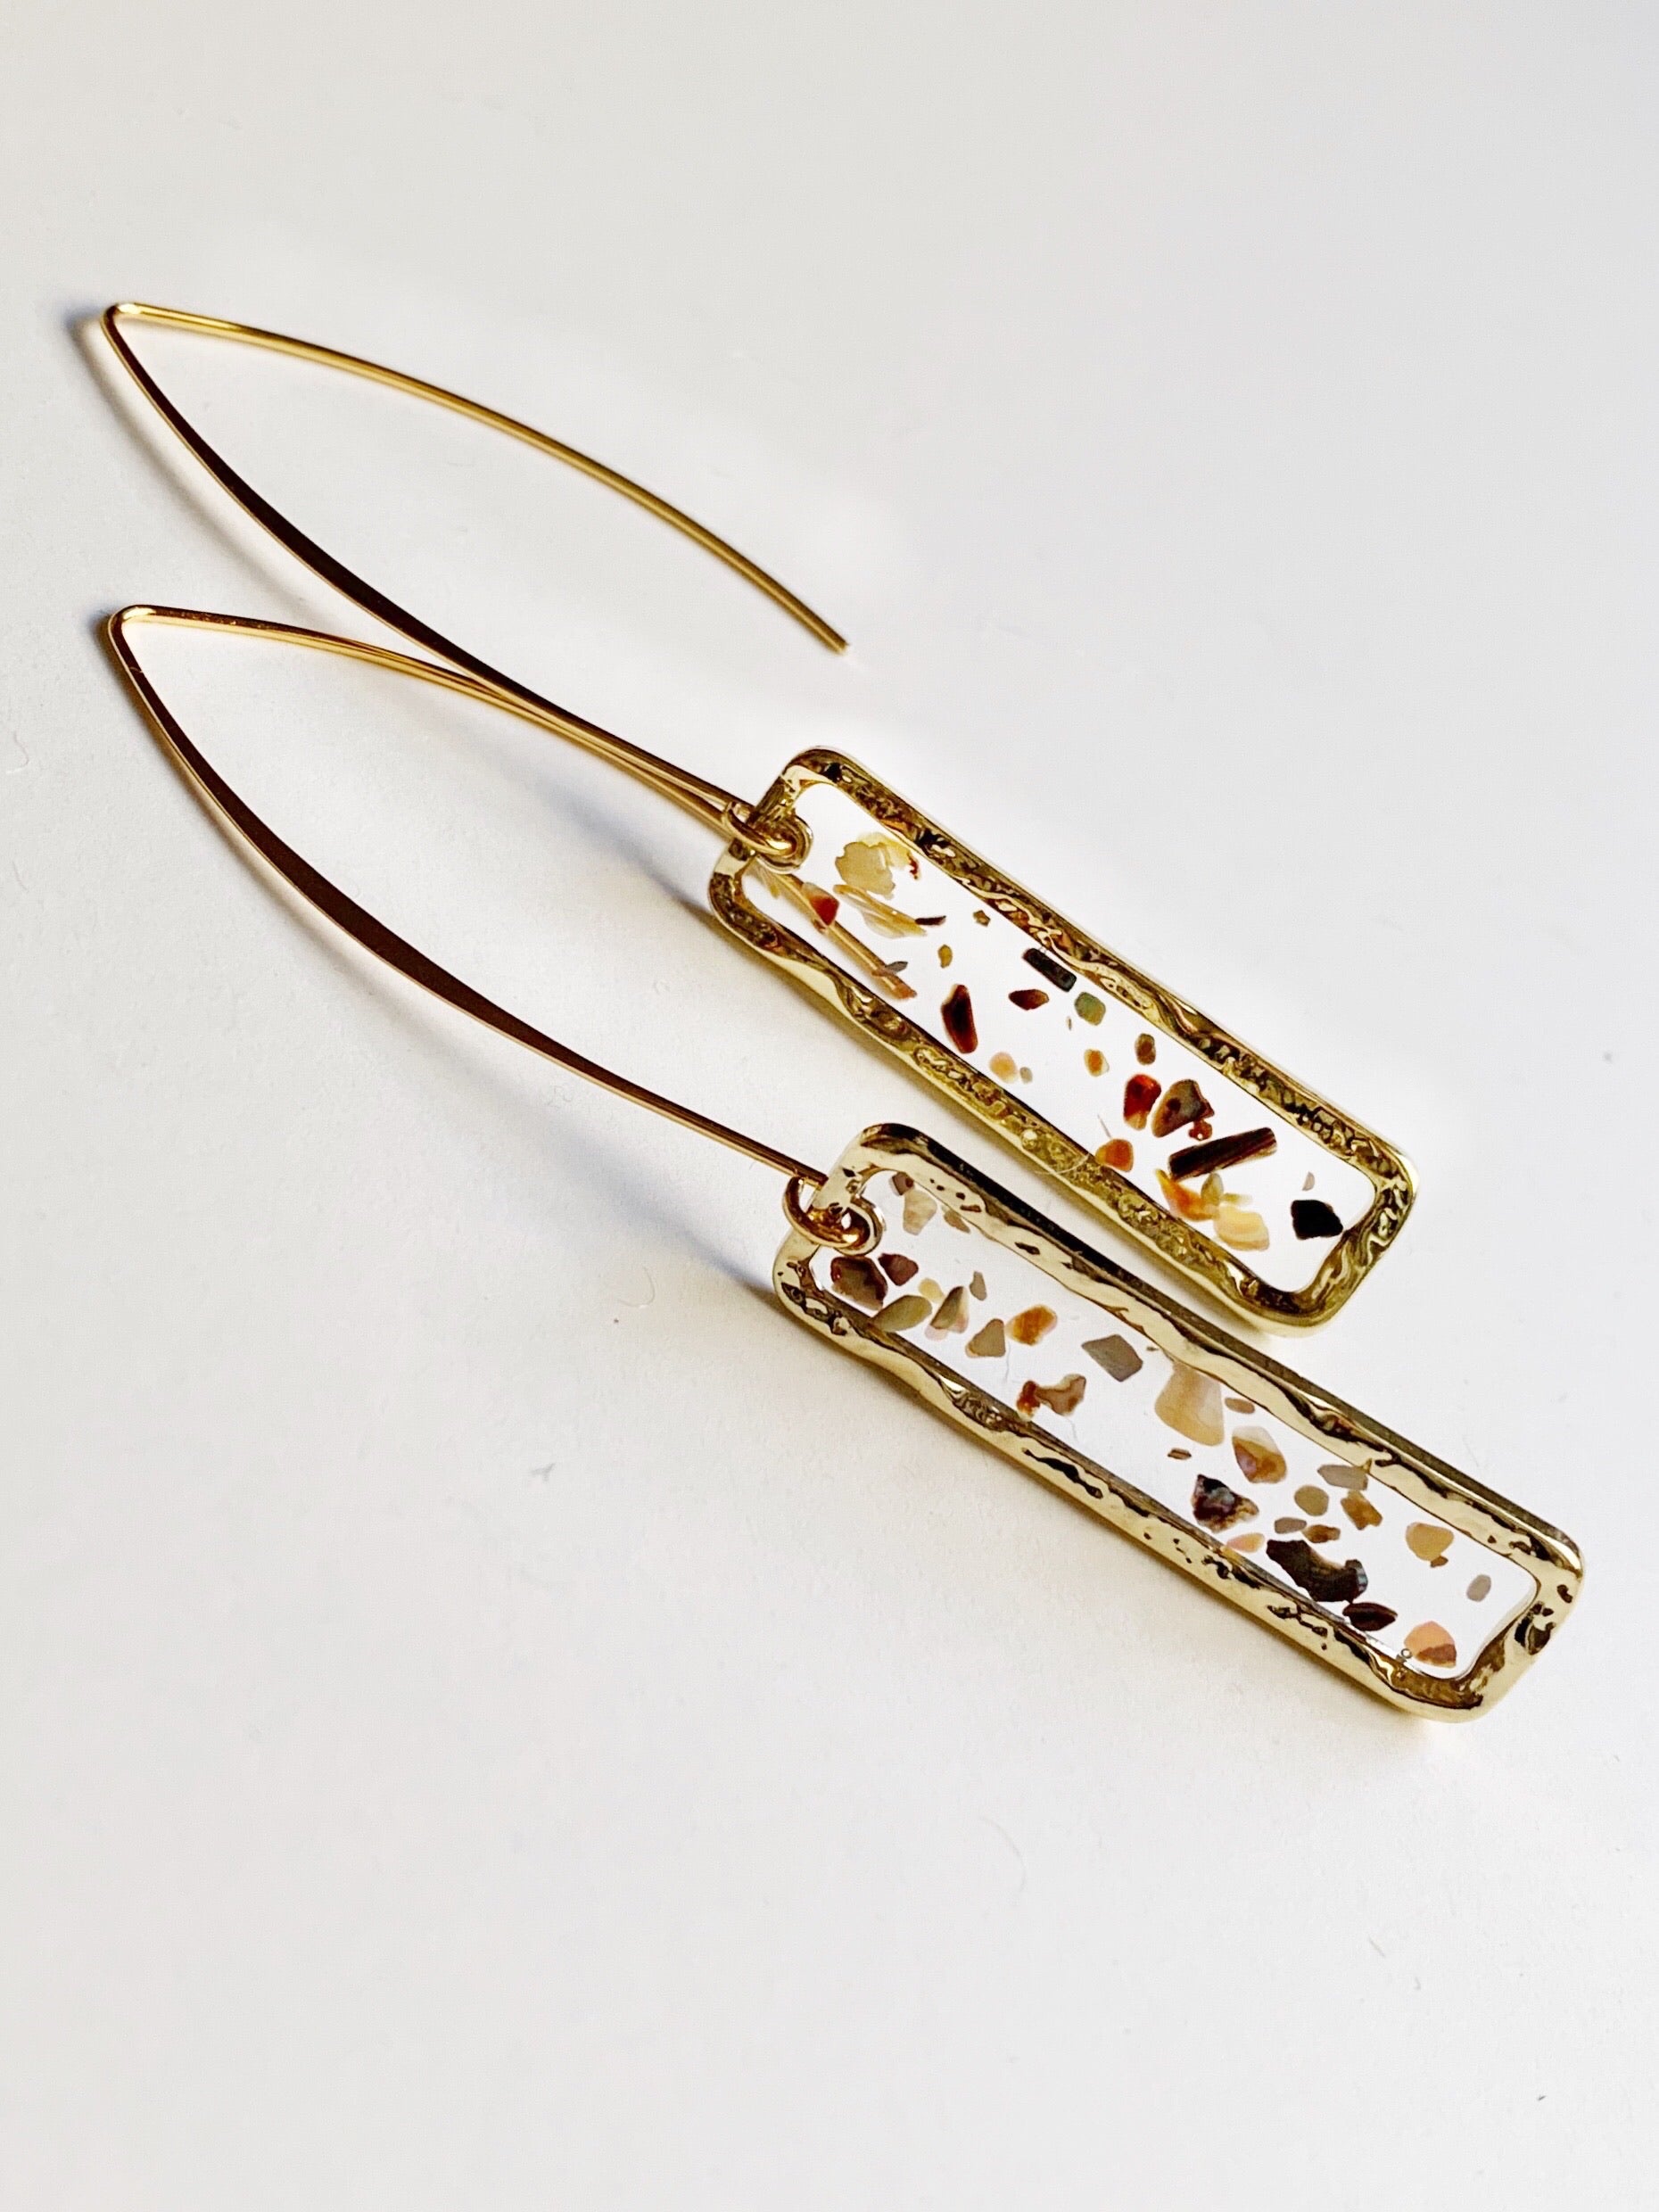 mother of pearl shell in epoxy resin setting with gold plated wire dangle earrings. 